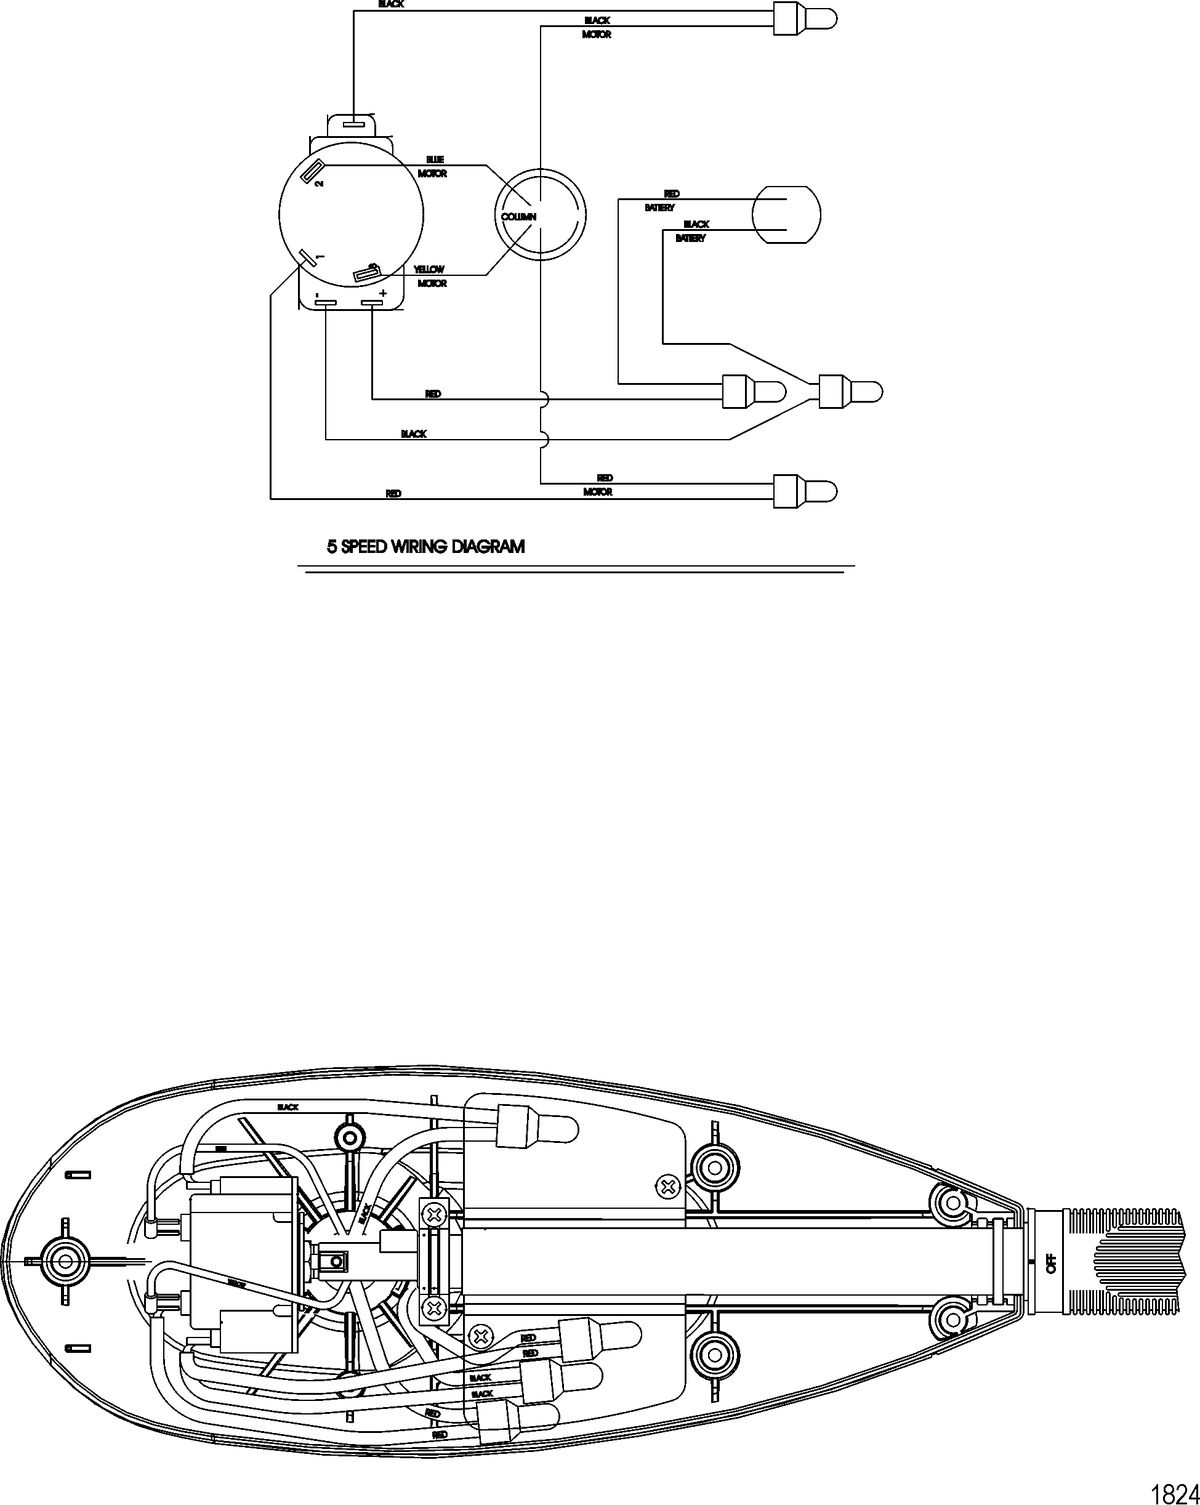 TROLLING MOTOR MOTORGUIDE FRESH WATER SERIES Wire Diagram(Model FW54HB) (Without Quick Connect)